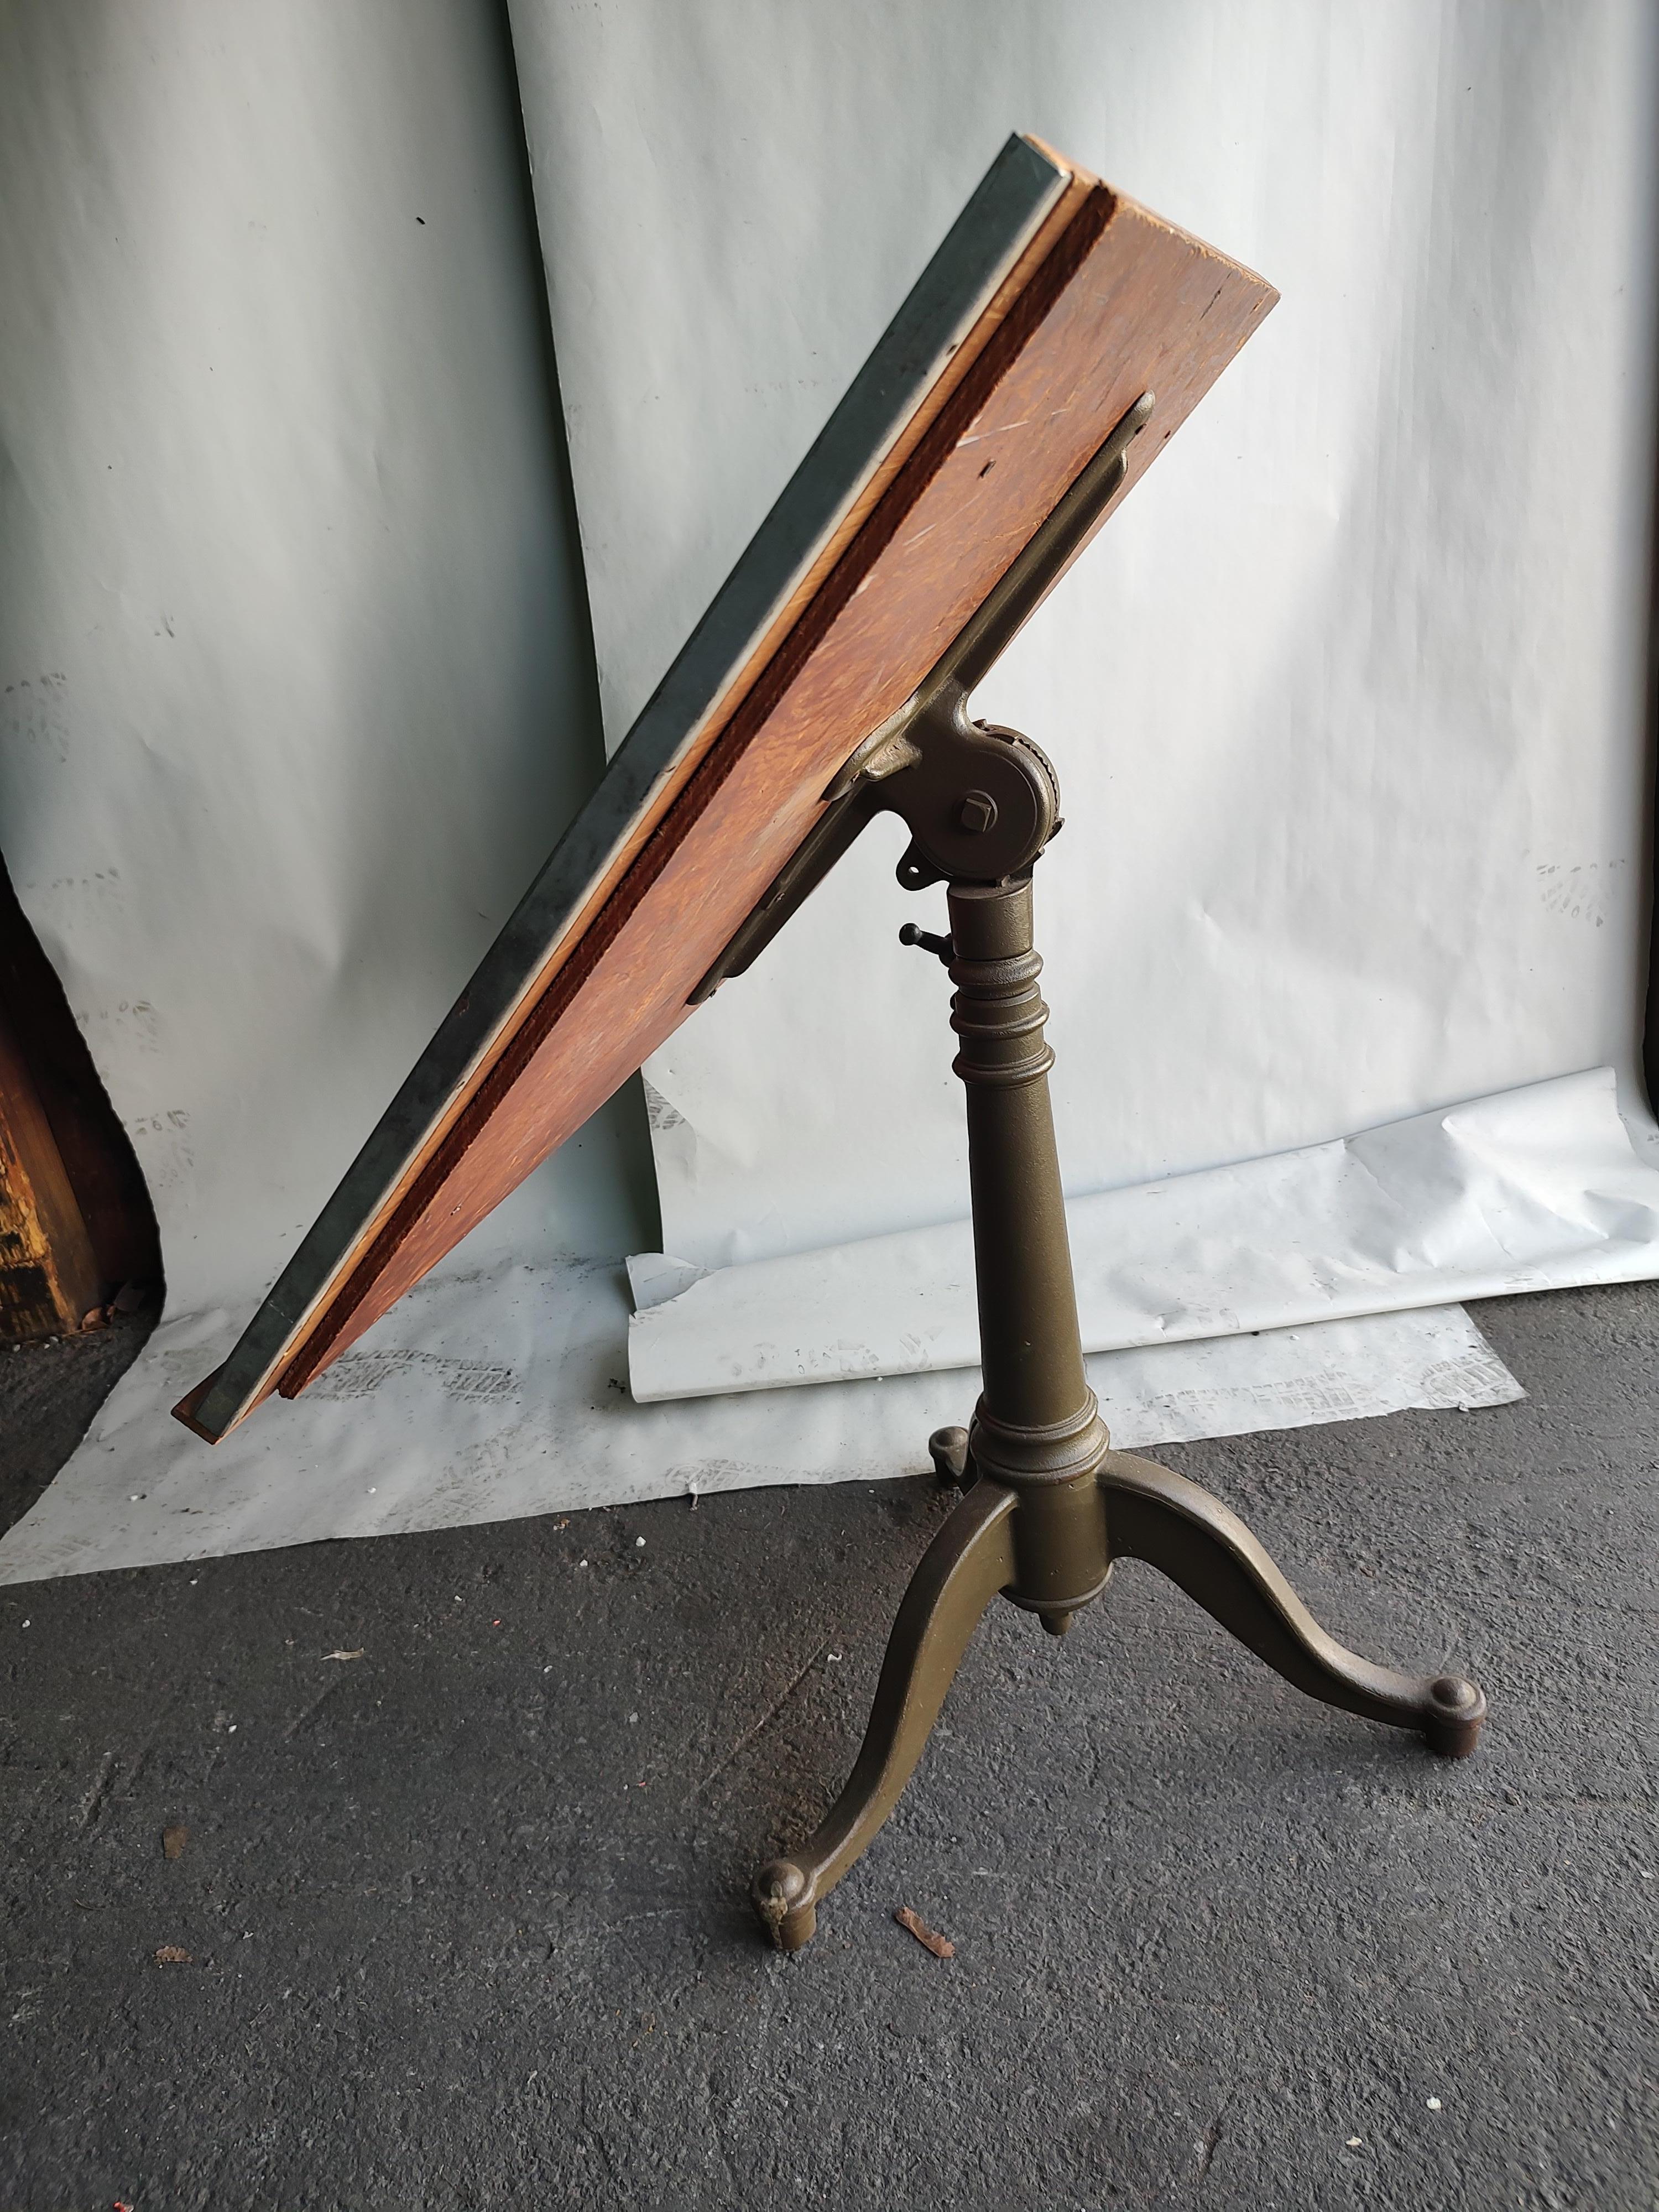 Industrial Early 20thC Fully Adjustable Drafting Table in Original Paint Military Green